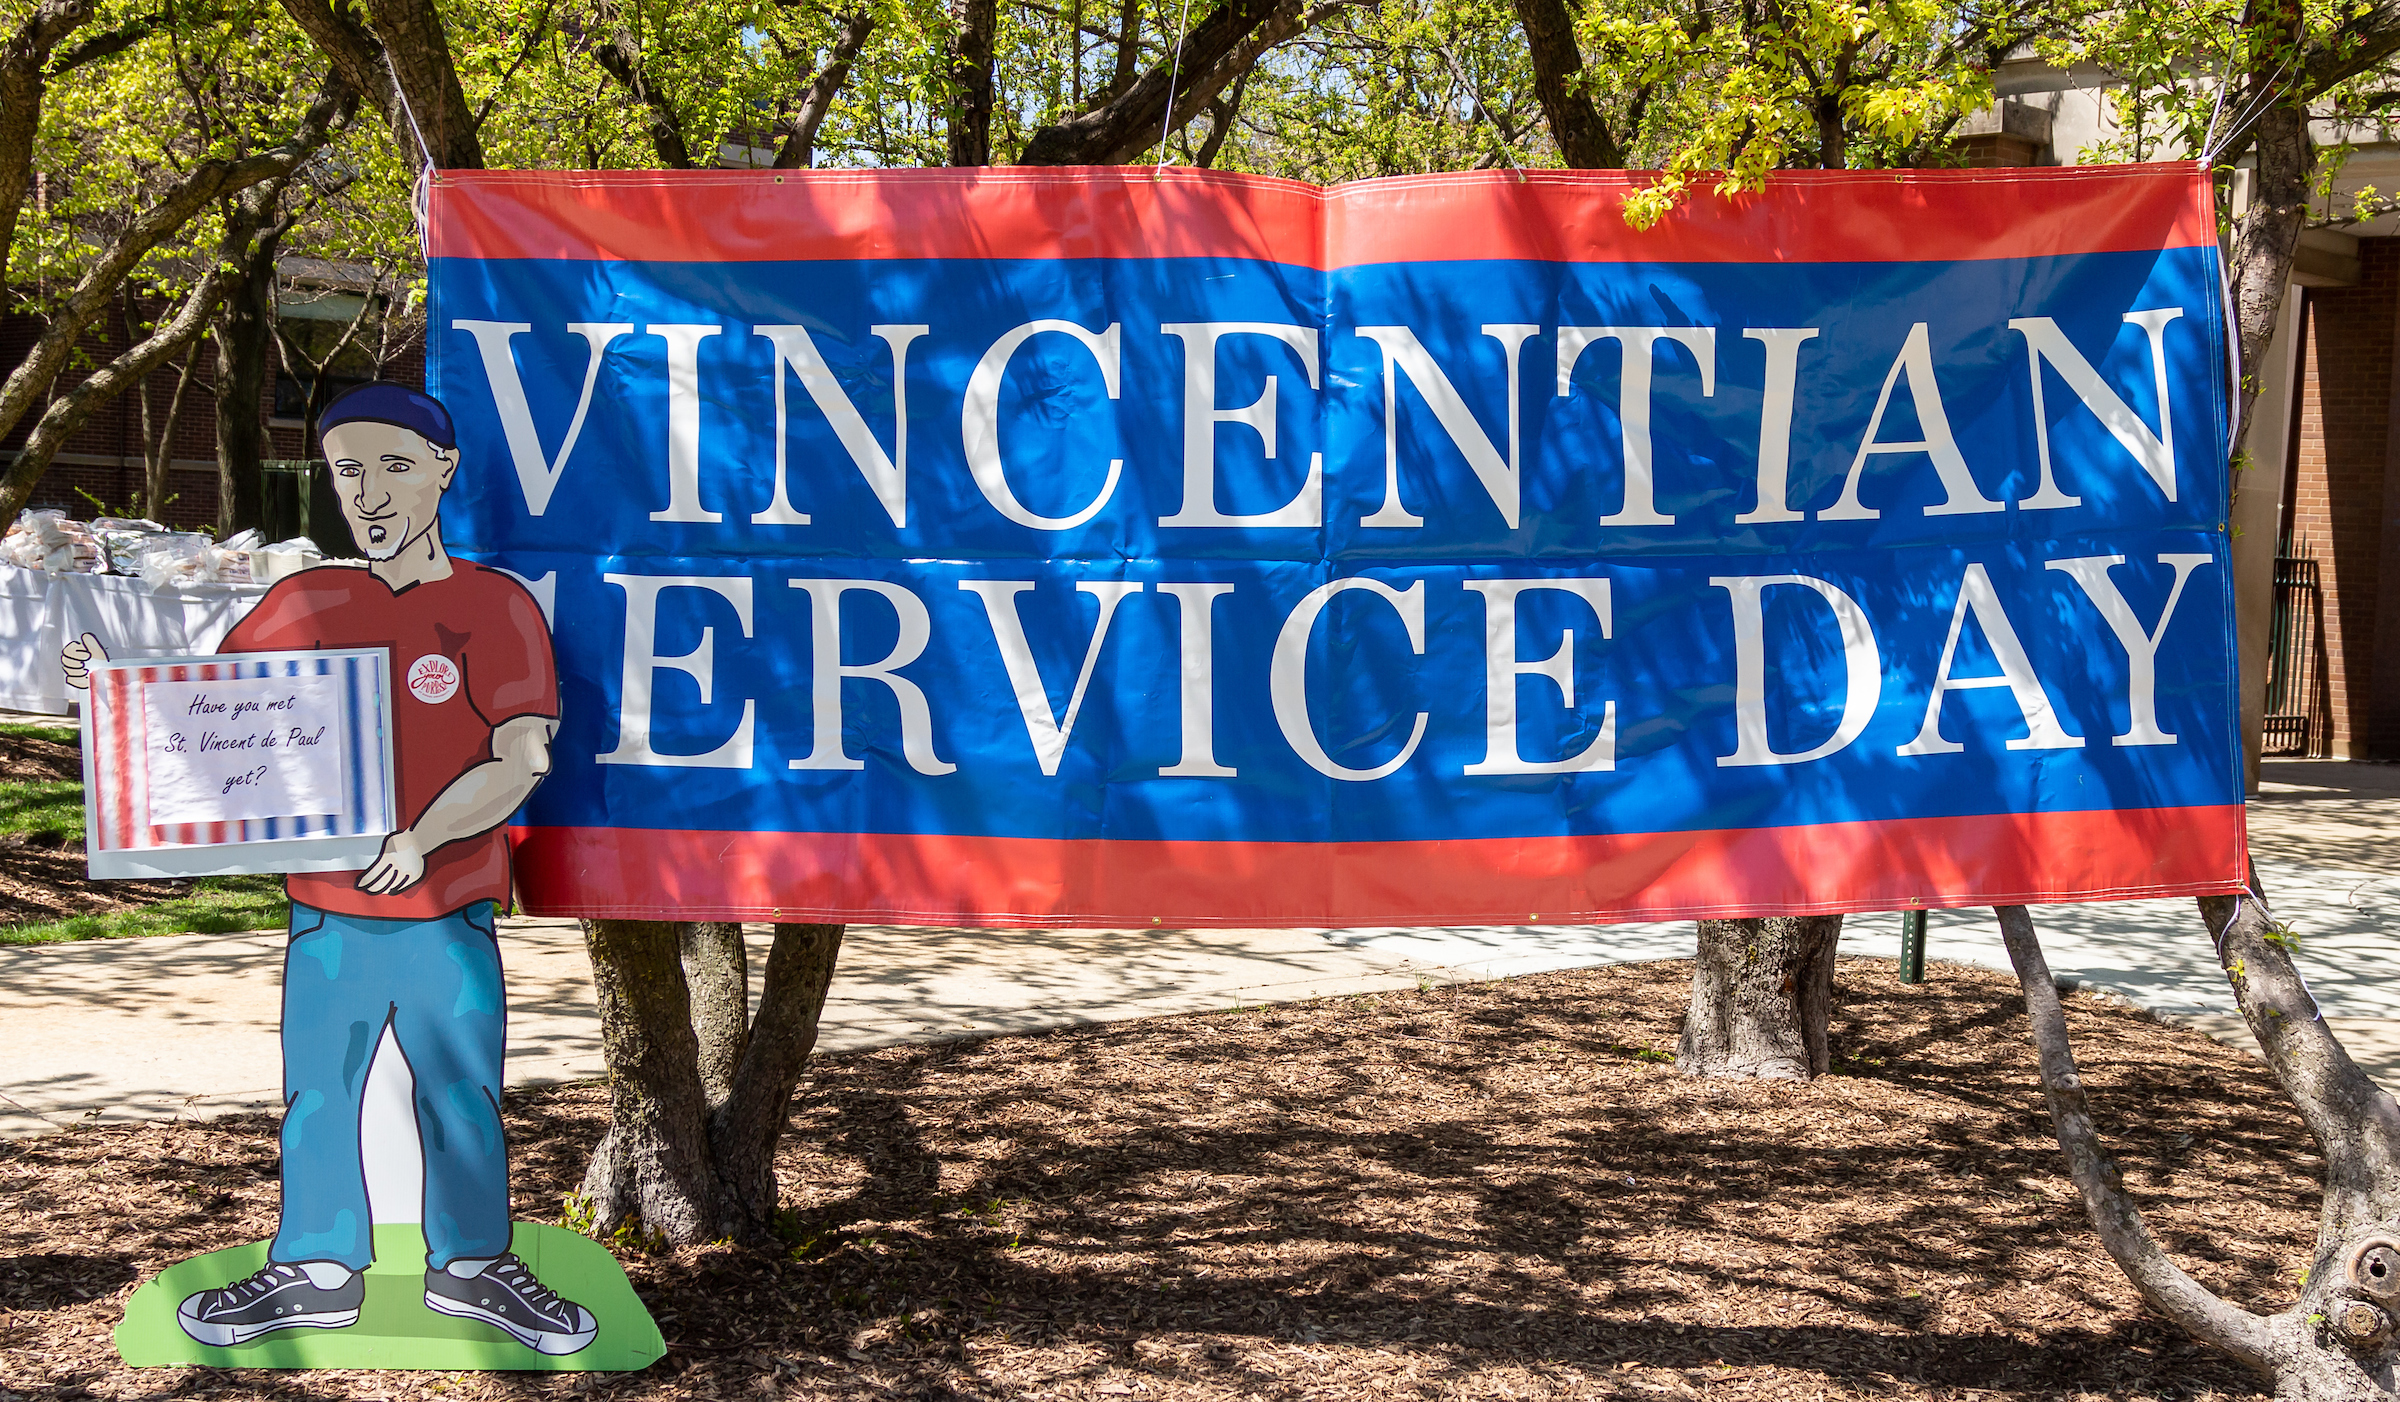 Vincentian Service Day